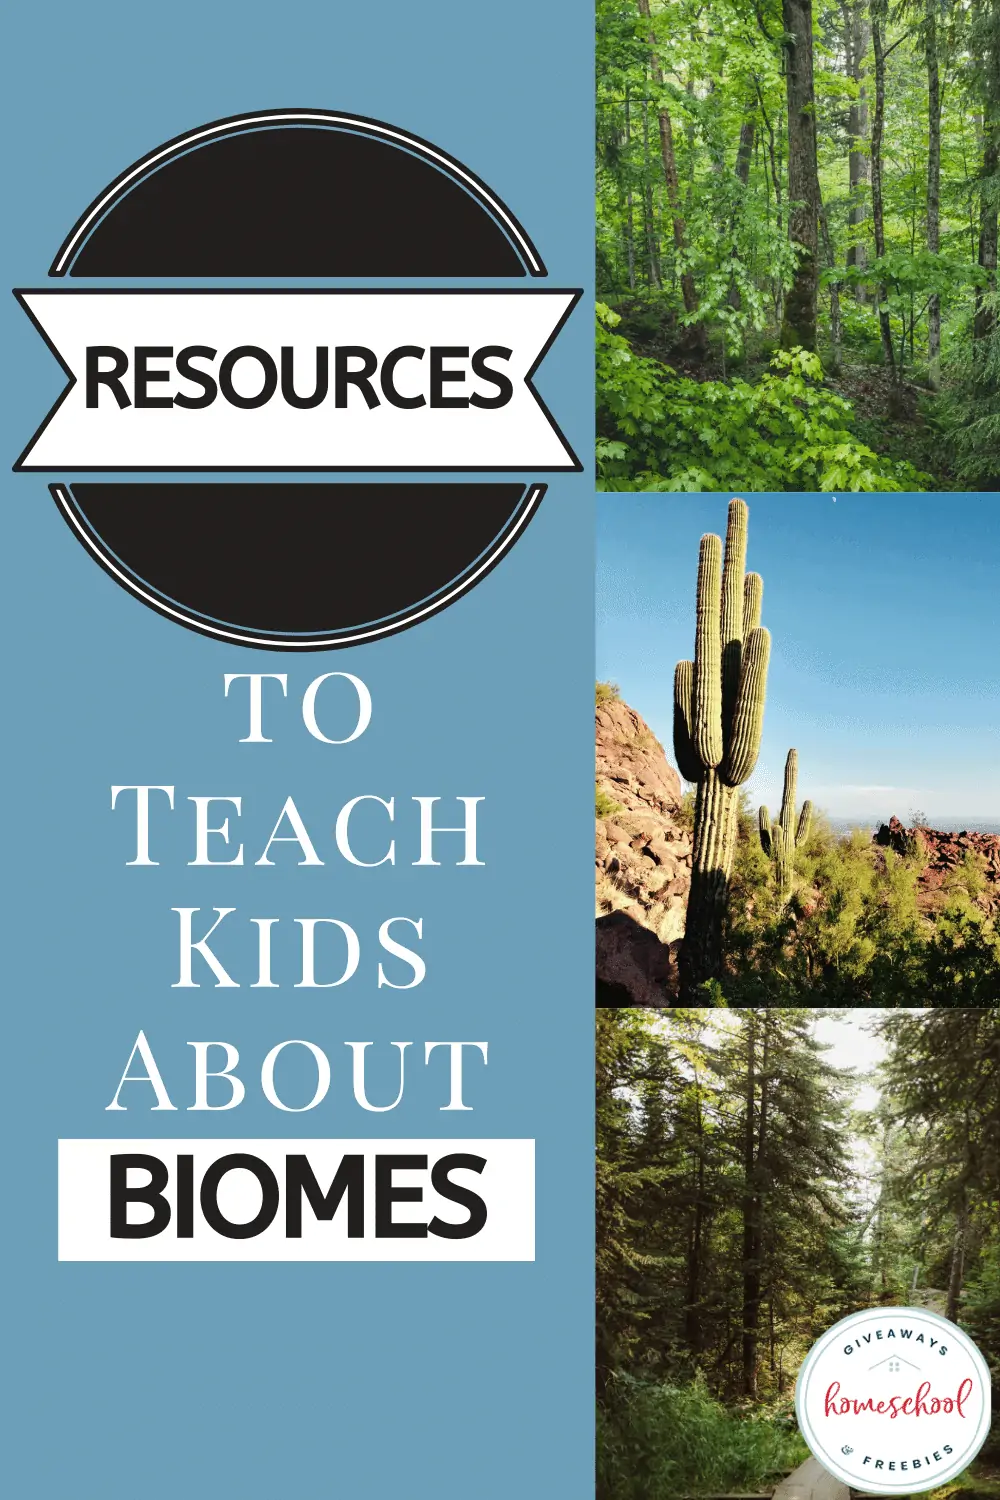 Resources to Teach Kids About Biomes